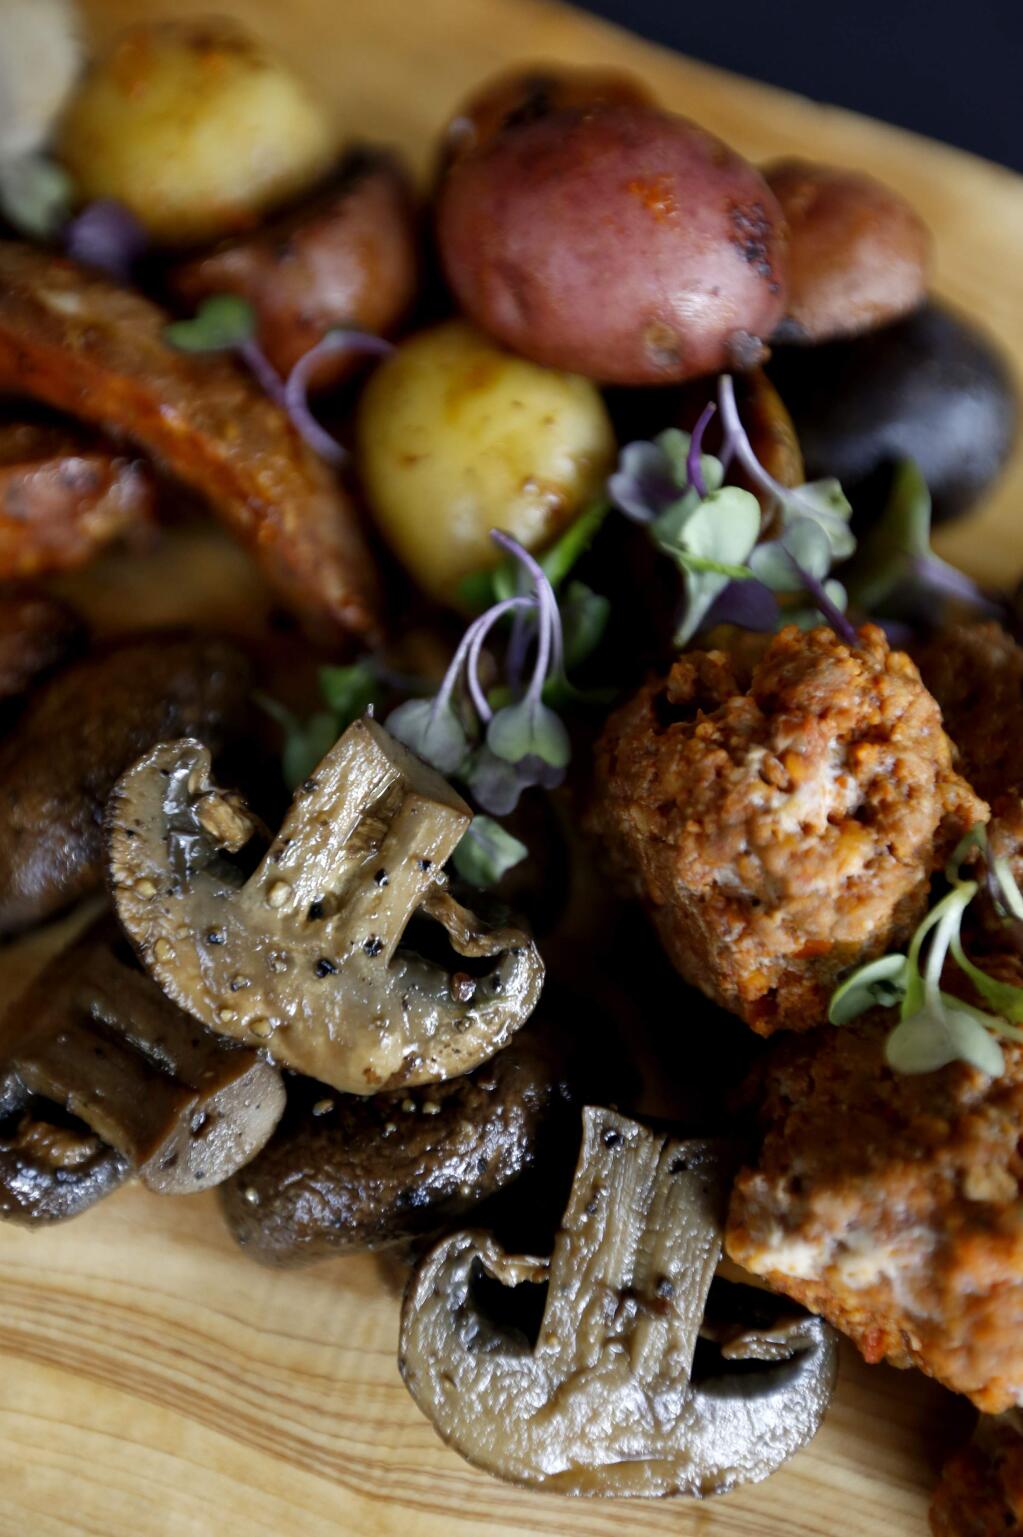 Roasted vegetables and sausages are ideal for dipping into a bagna cauda.